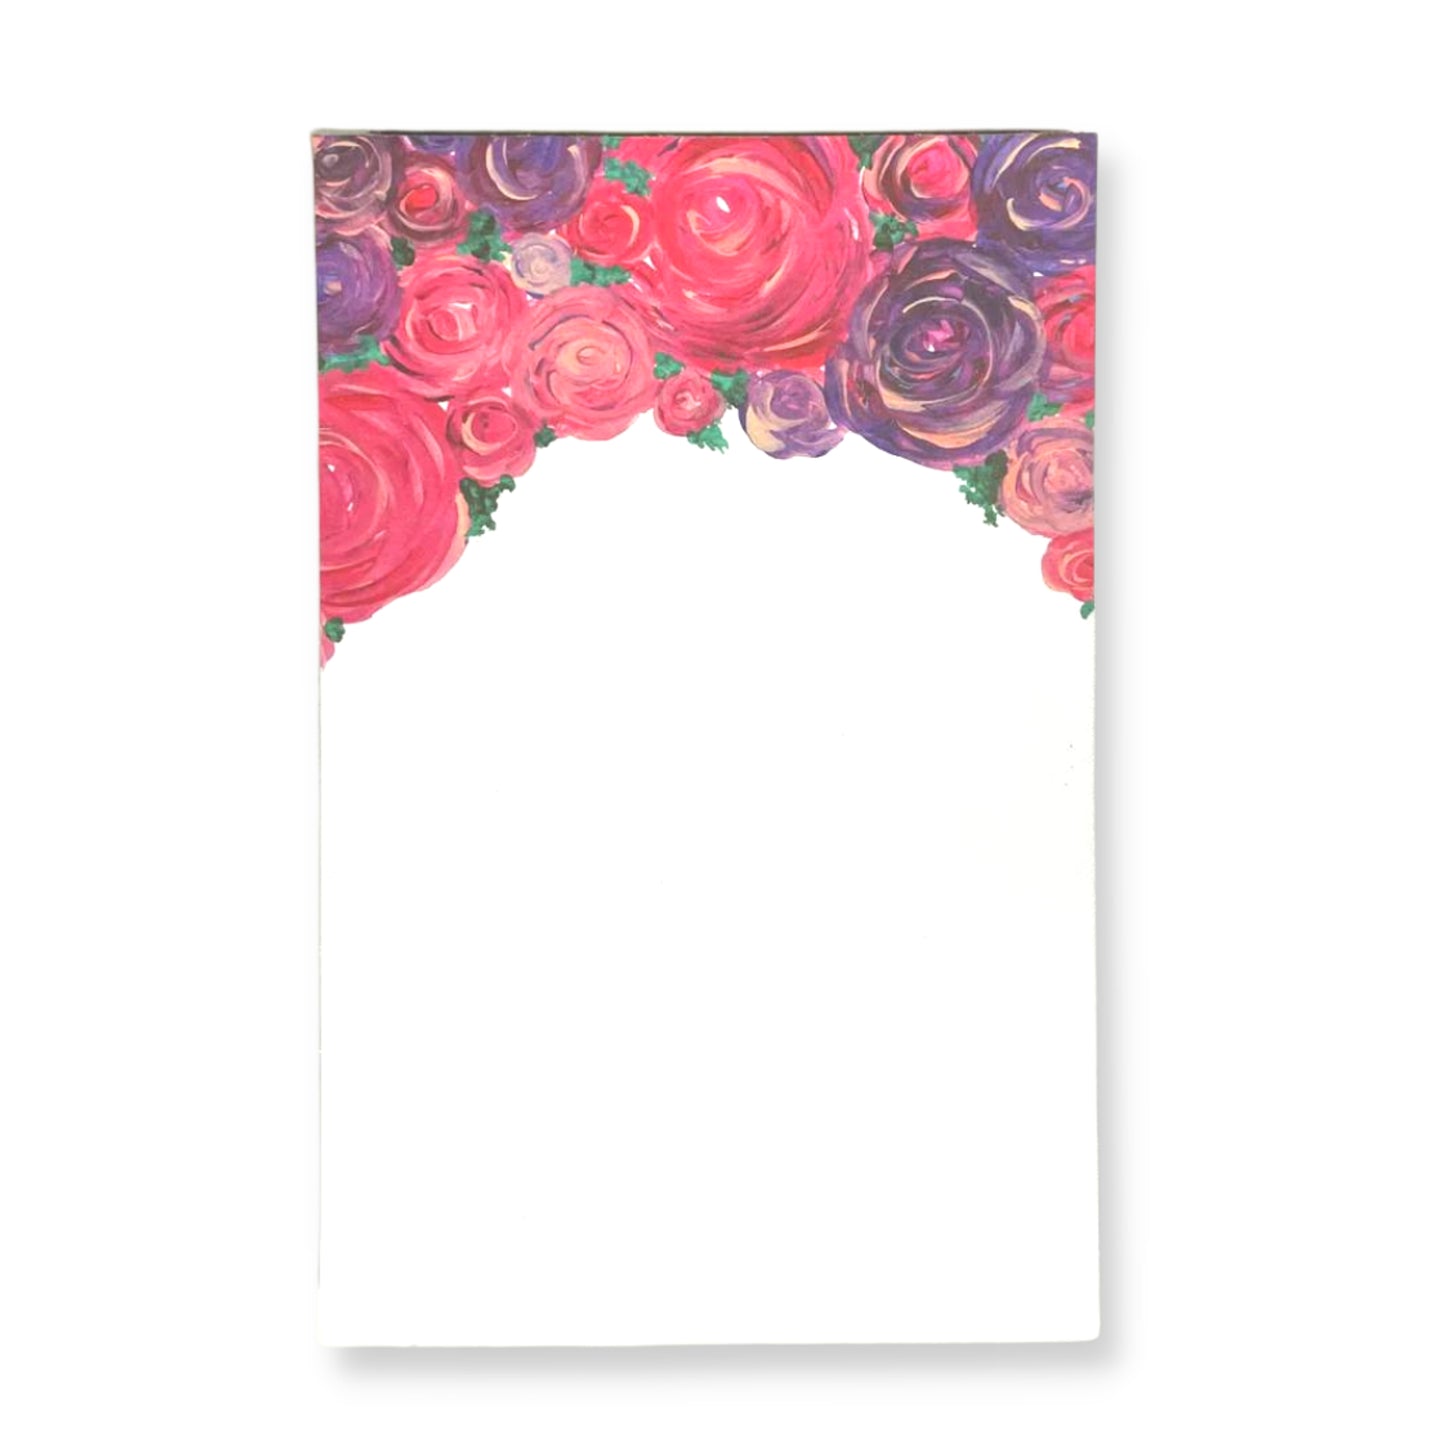 NP158 - NOTEPAD - PINK & PURPLE ROSES